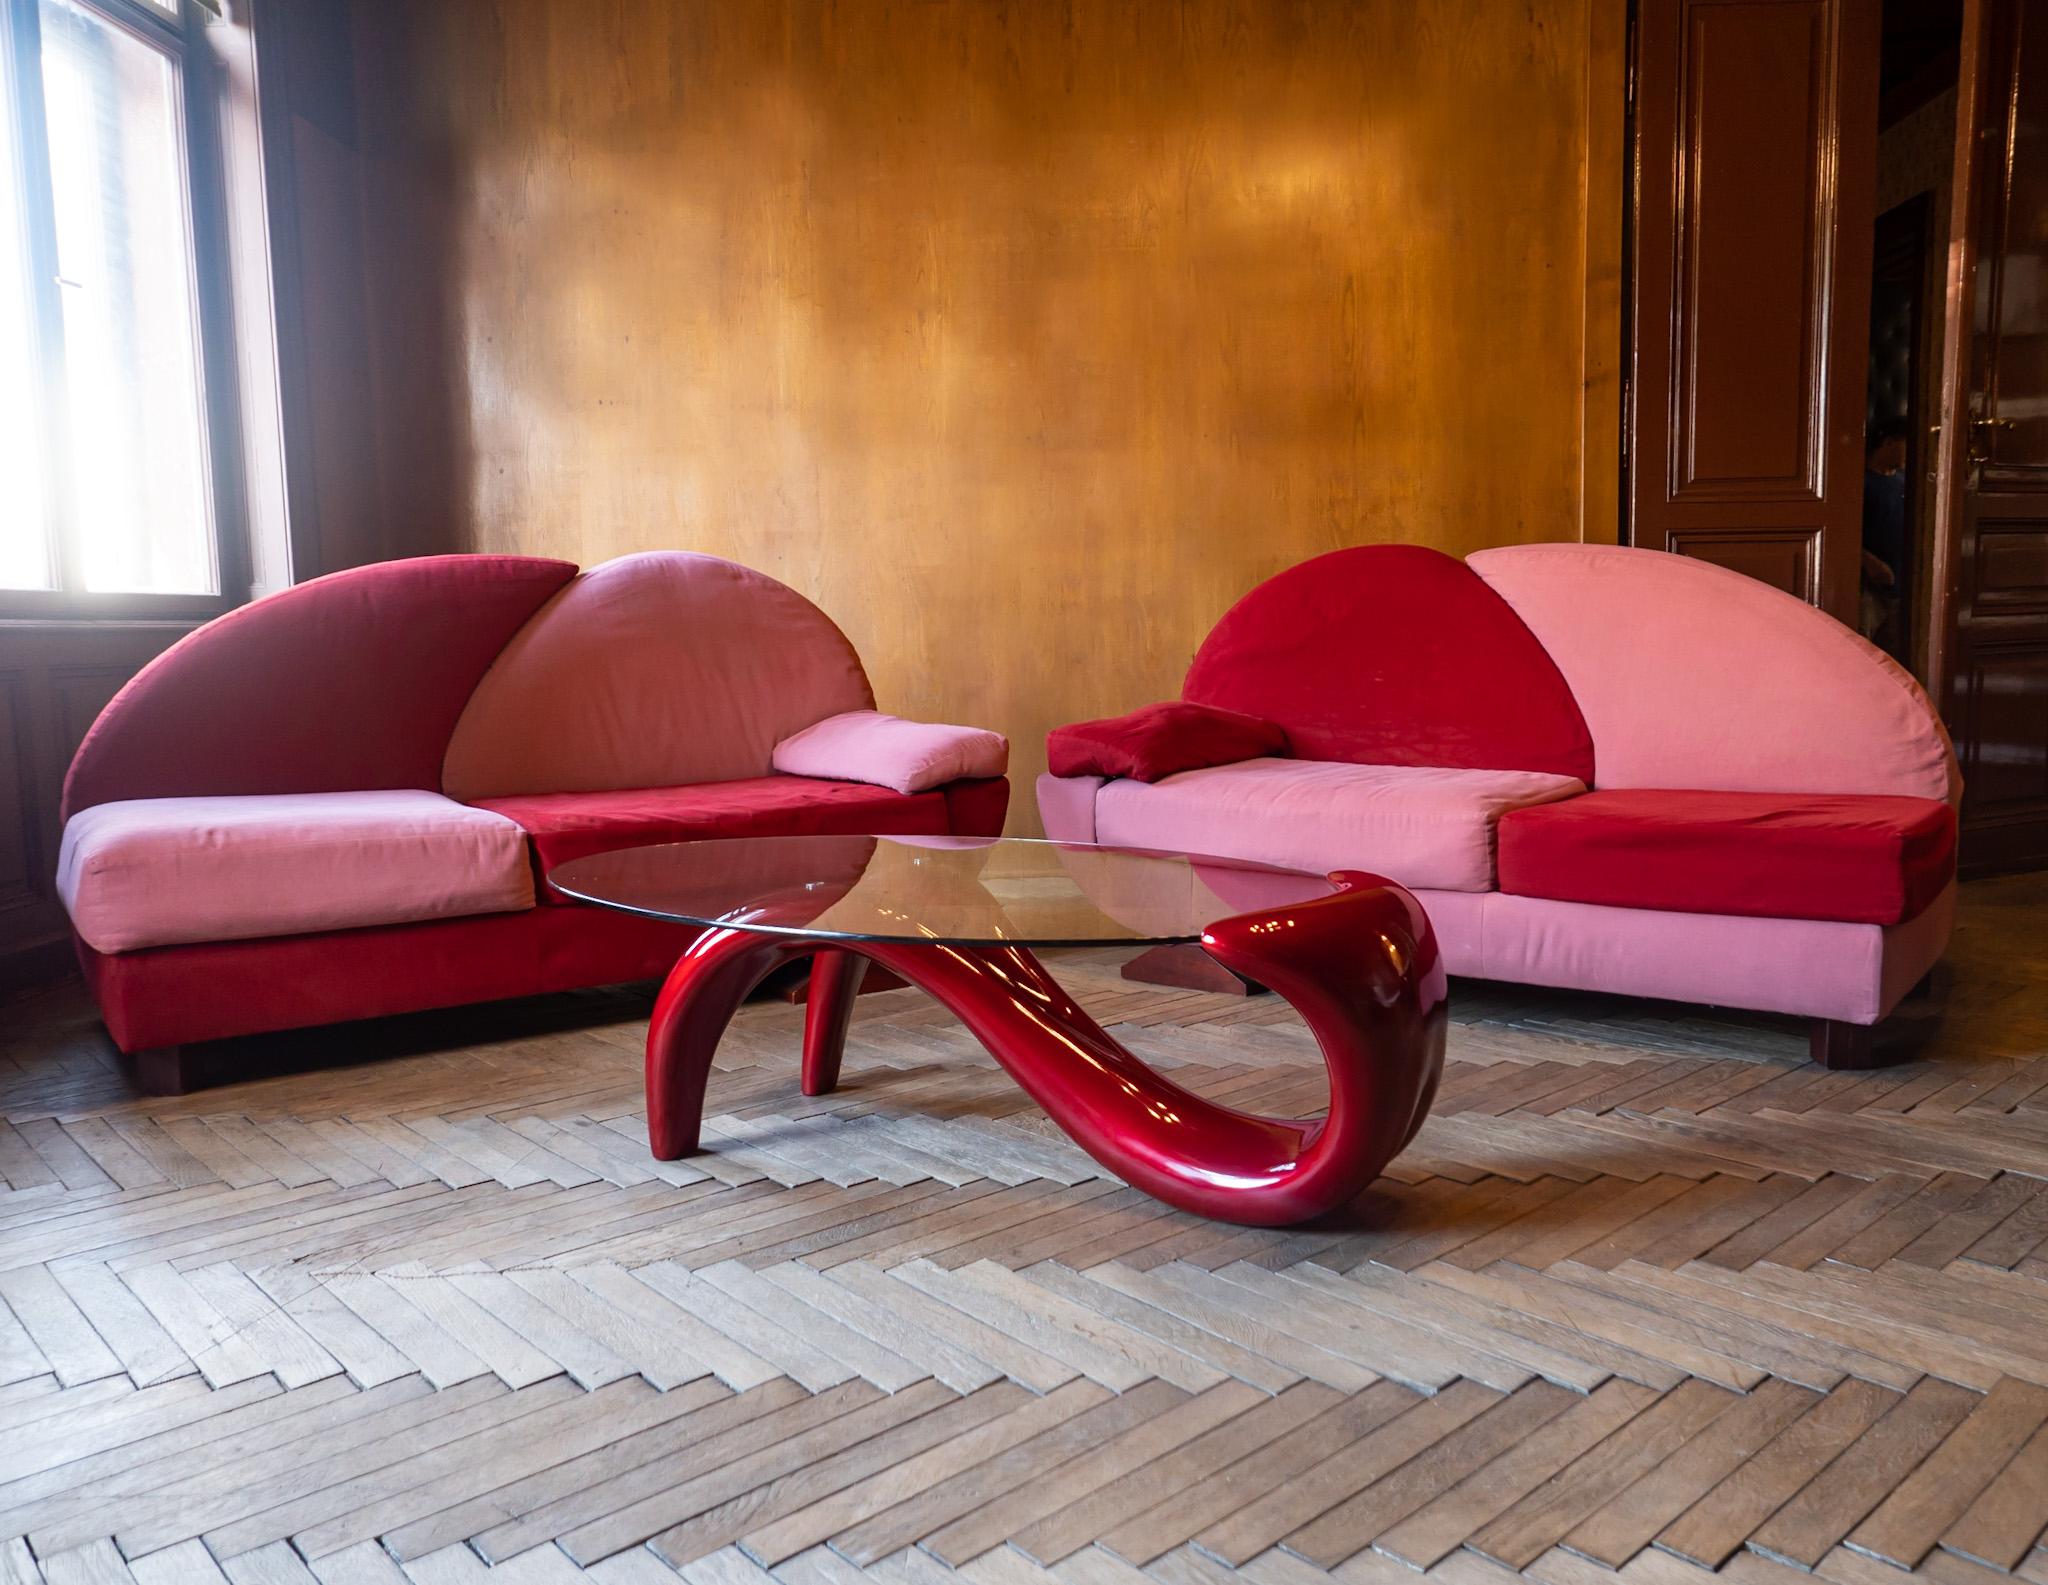 Textile Post-Modern Pink and Red Alcantara Sofas, Italy, 1980s For Sale